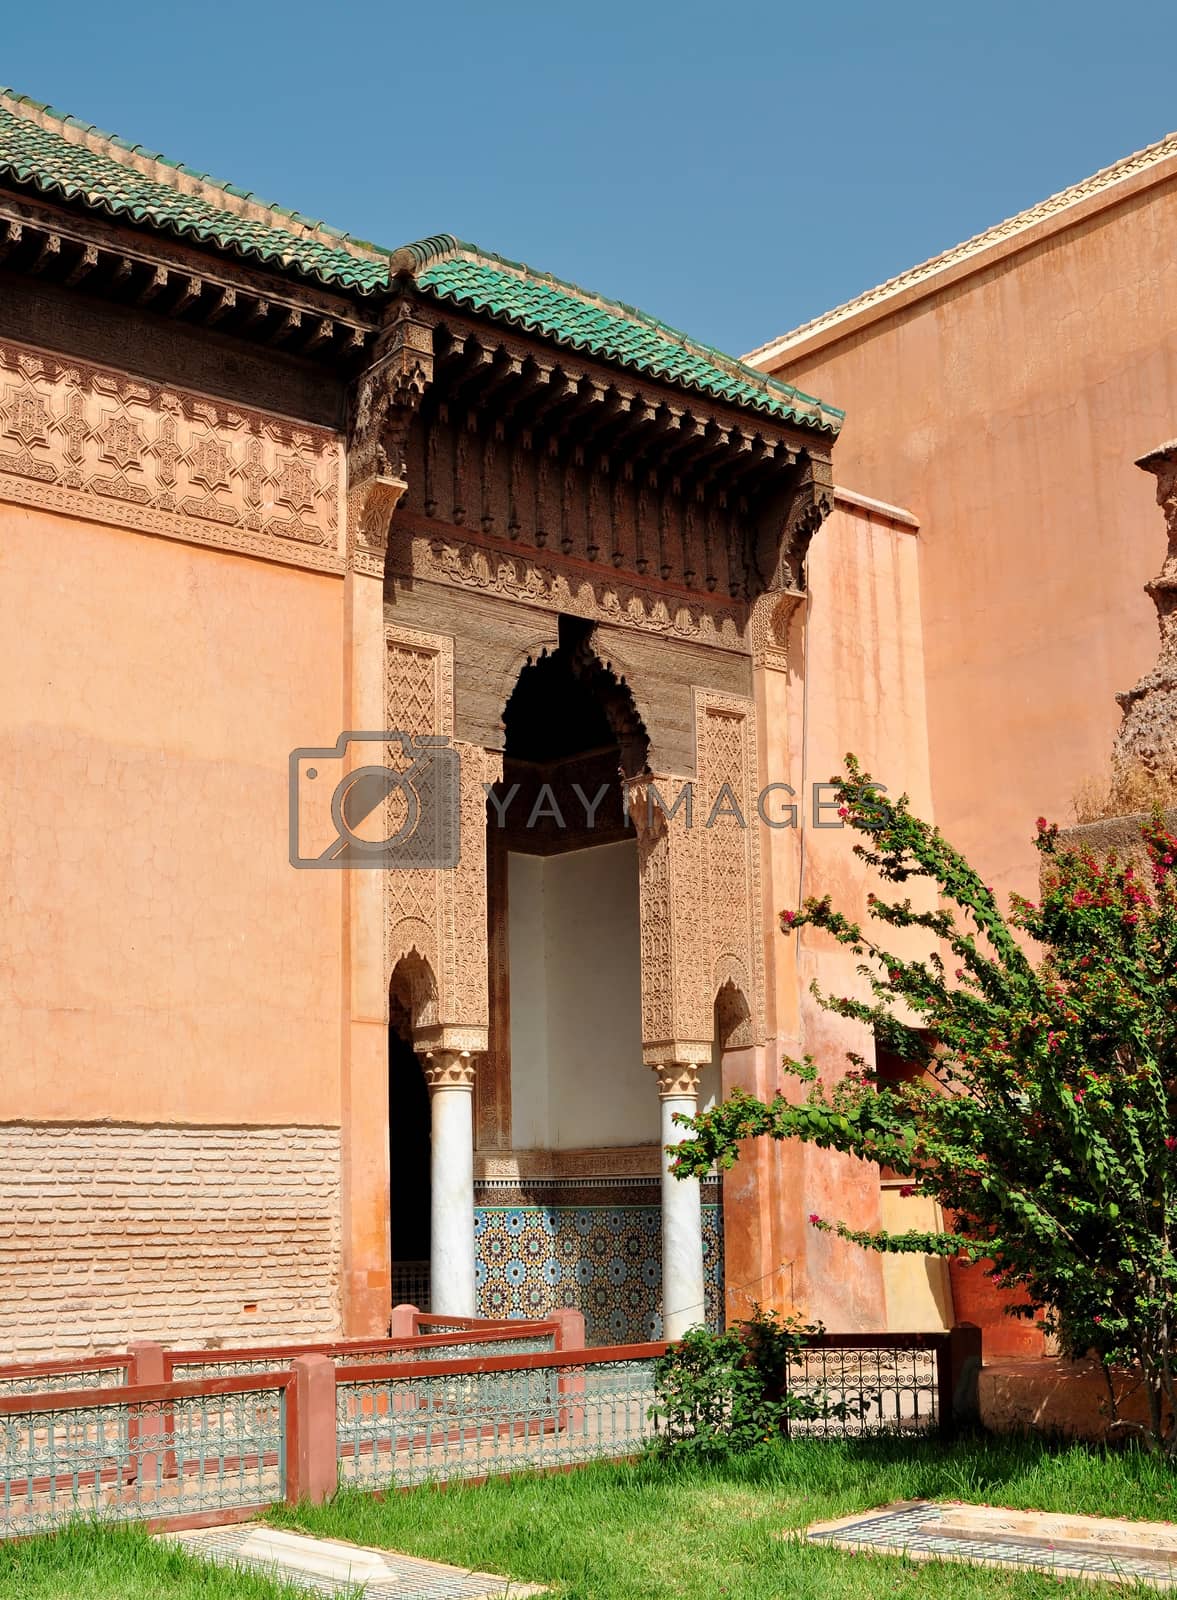 Royalty free image of marrakech saadian tombs by tony4urban